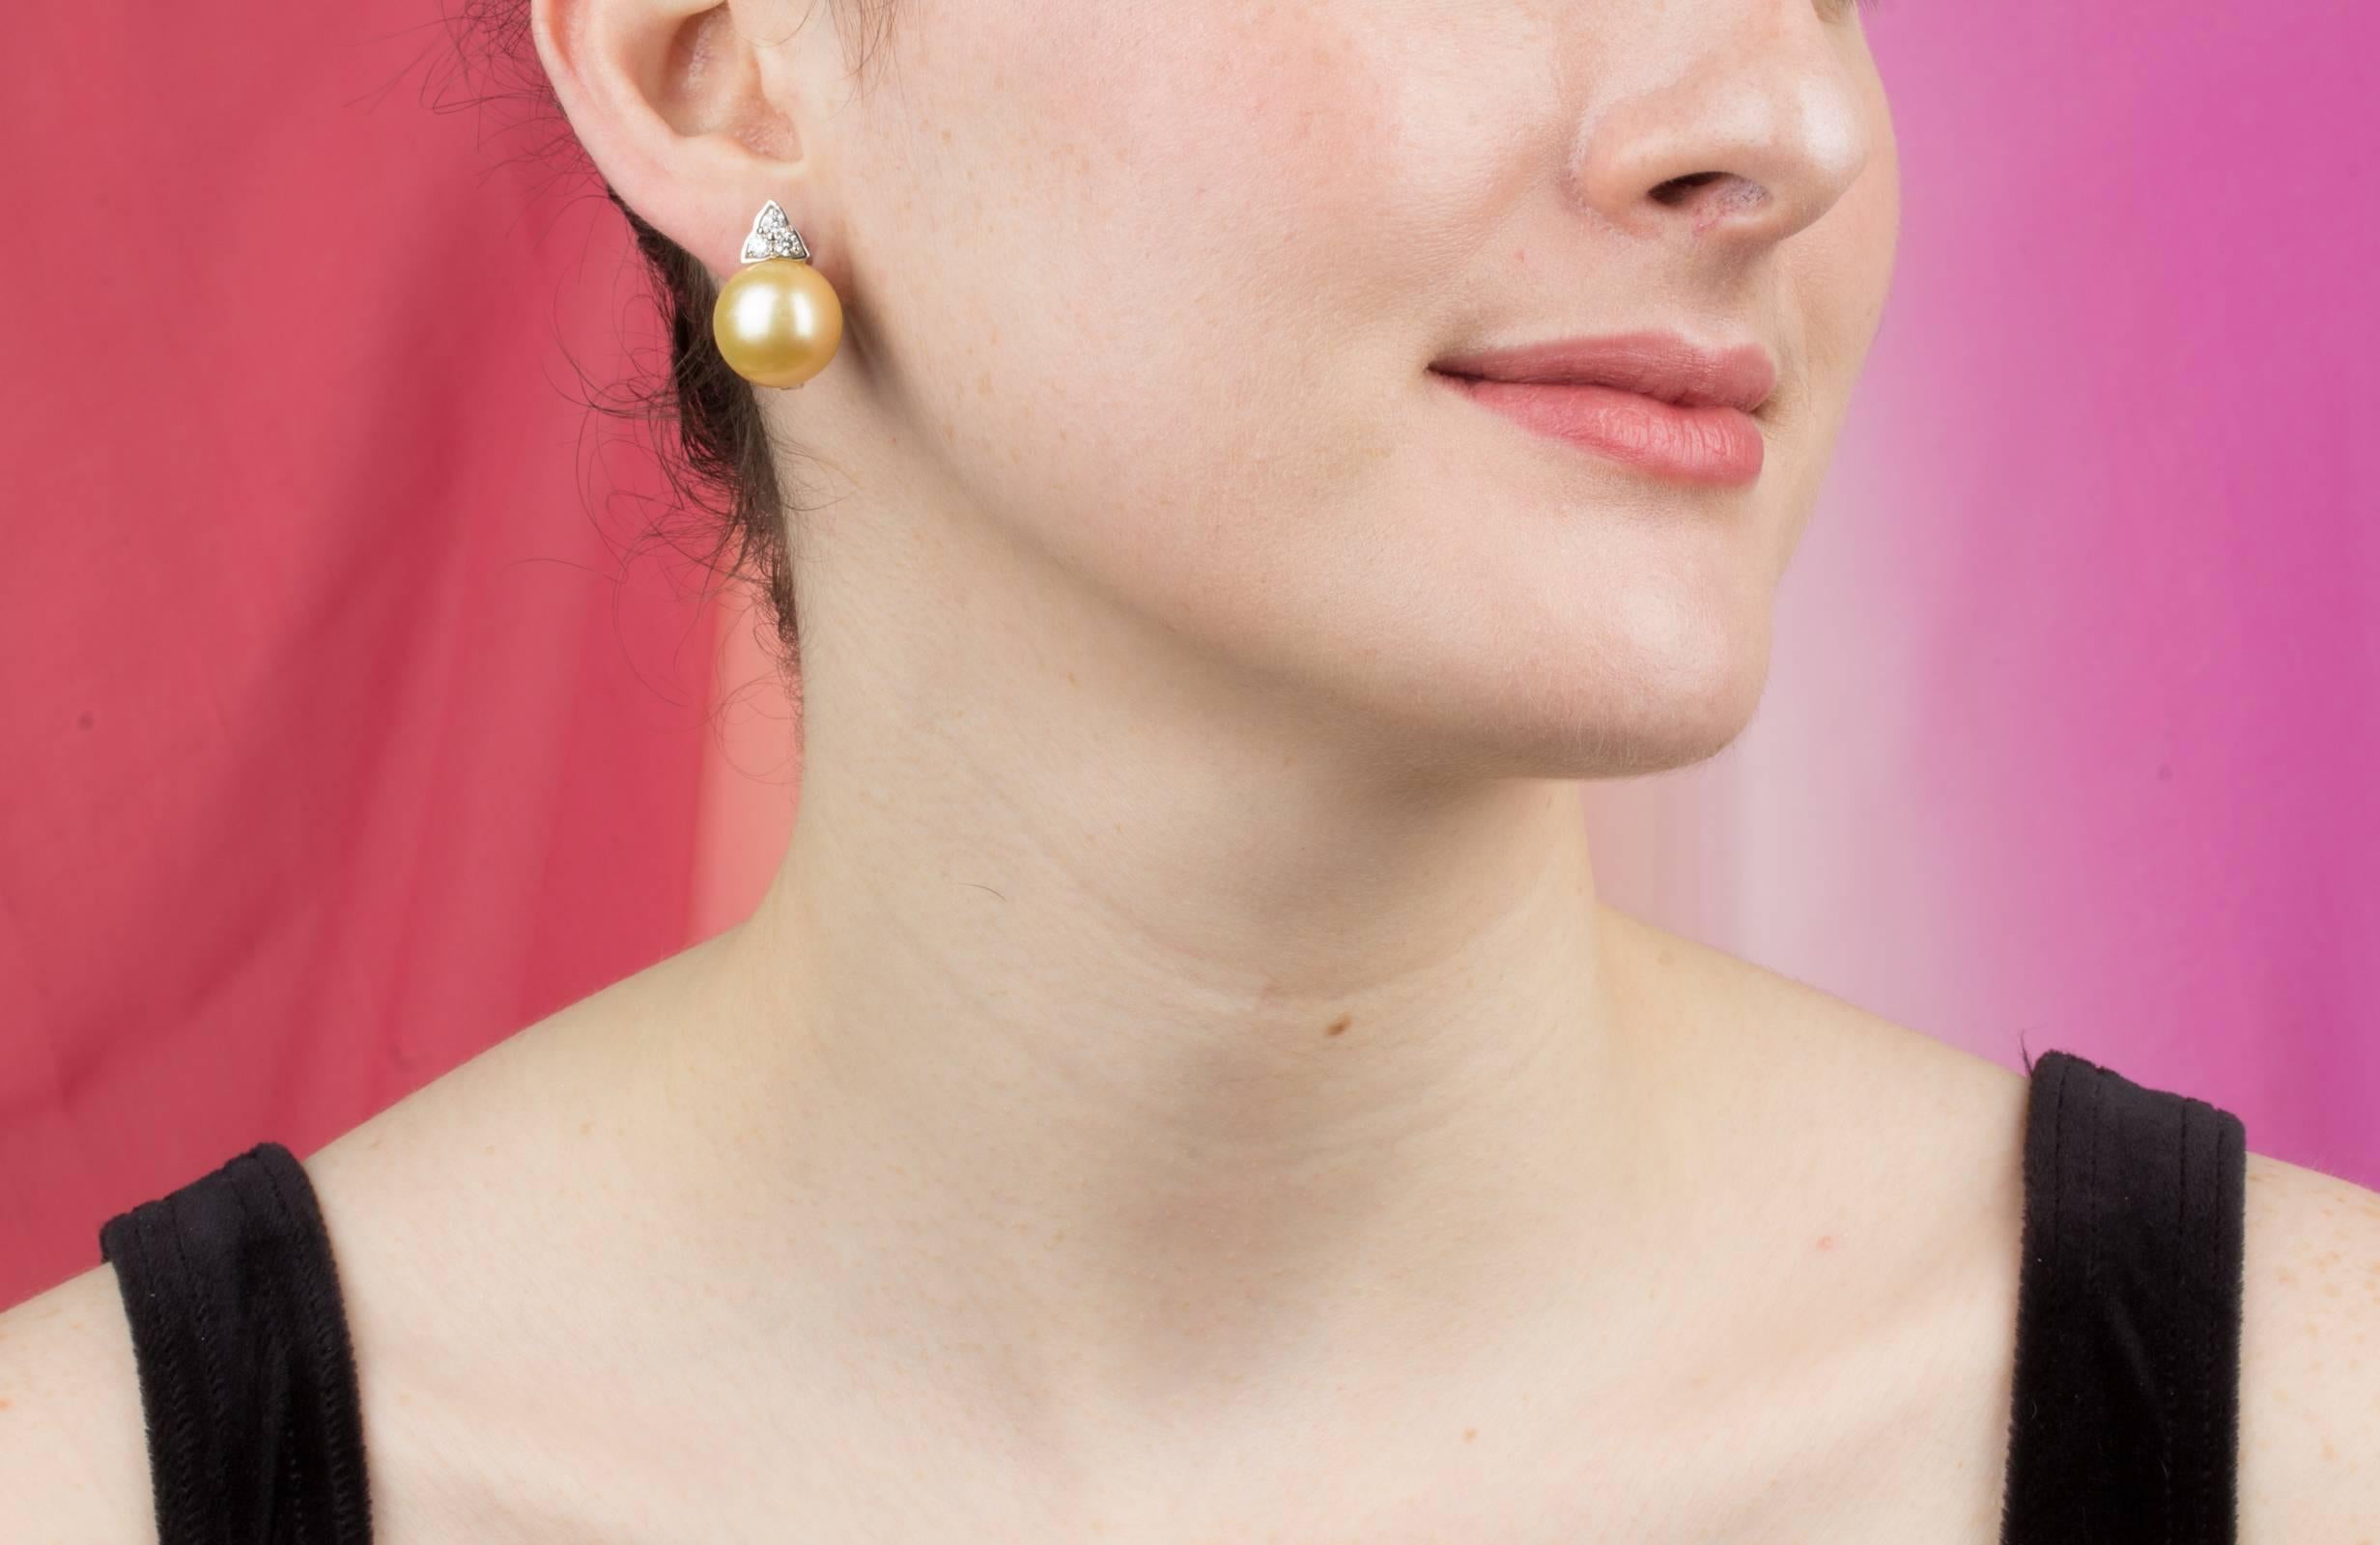 The golden pearl and diamond earrings feature two large South Sea pearls of 16mm diameter with a decorative triangular diamond design.
The untreated South Sea pearls originate from the waters of Northwestern Australia. They display a lovely nacre